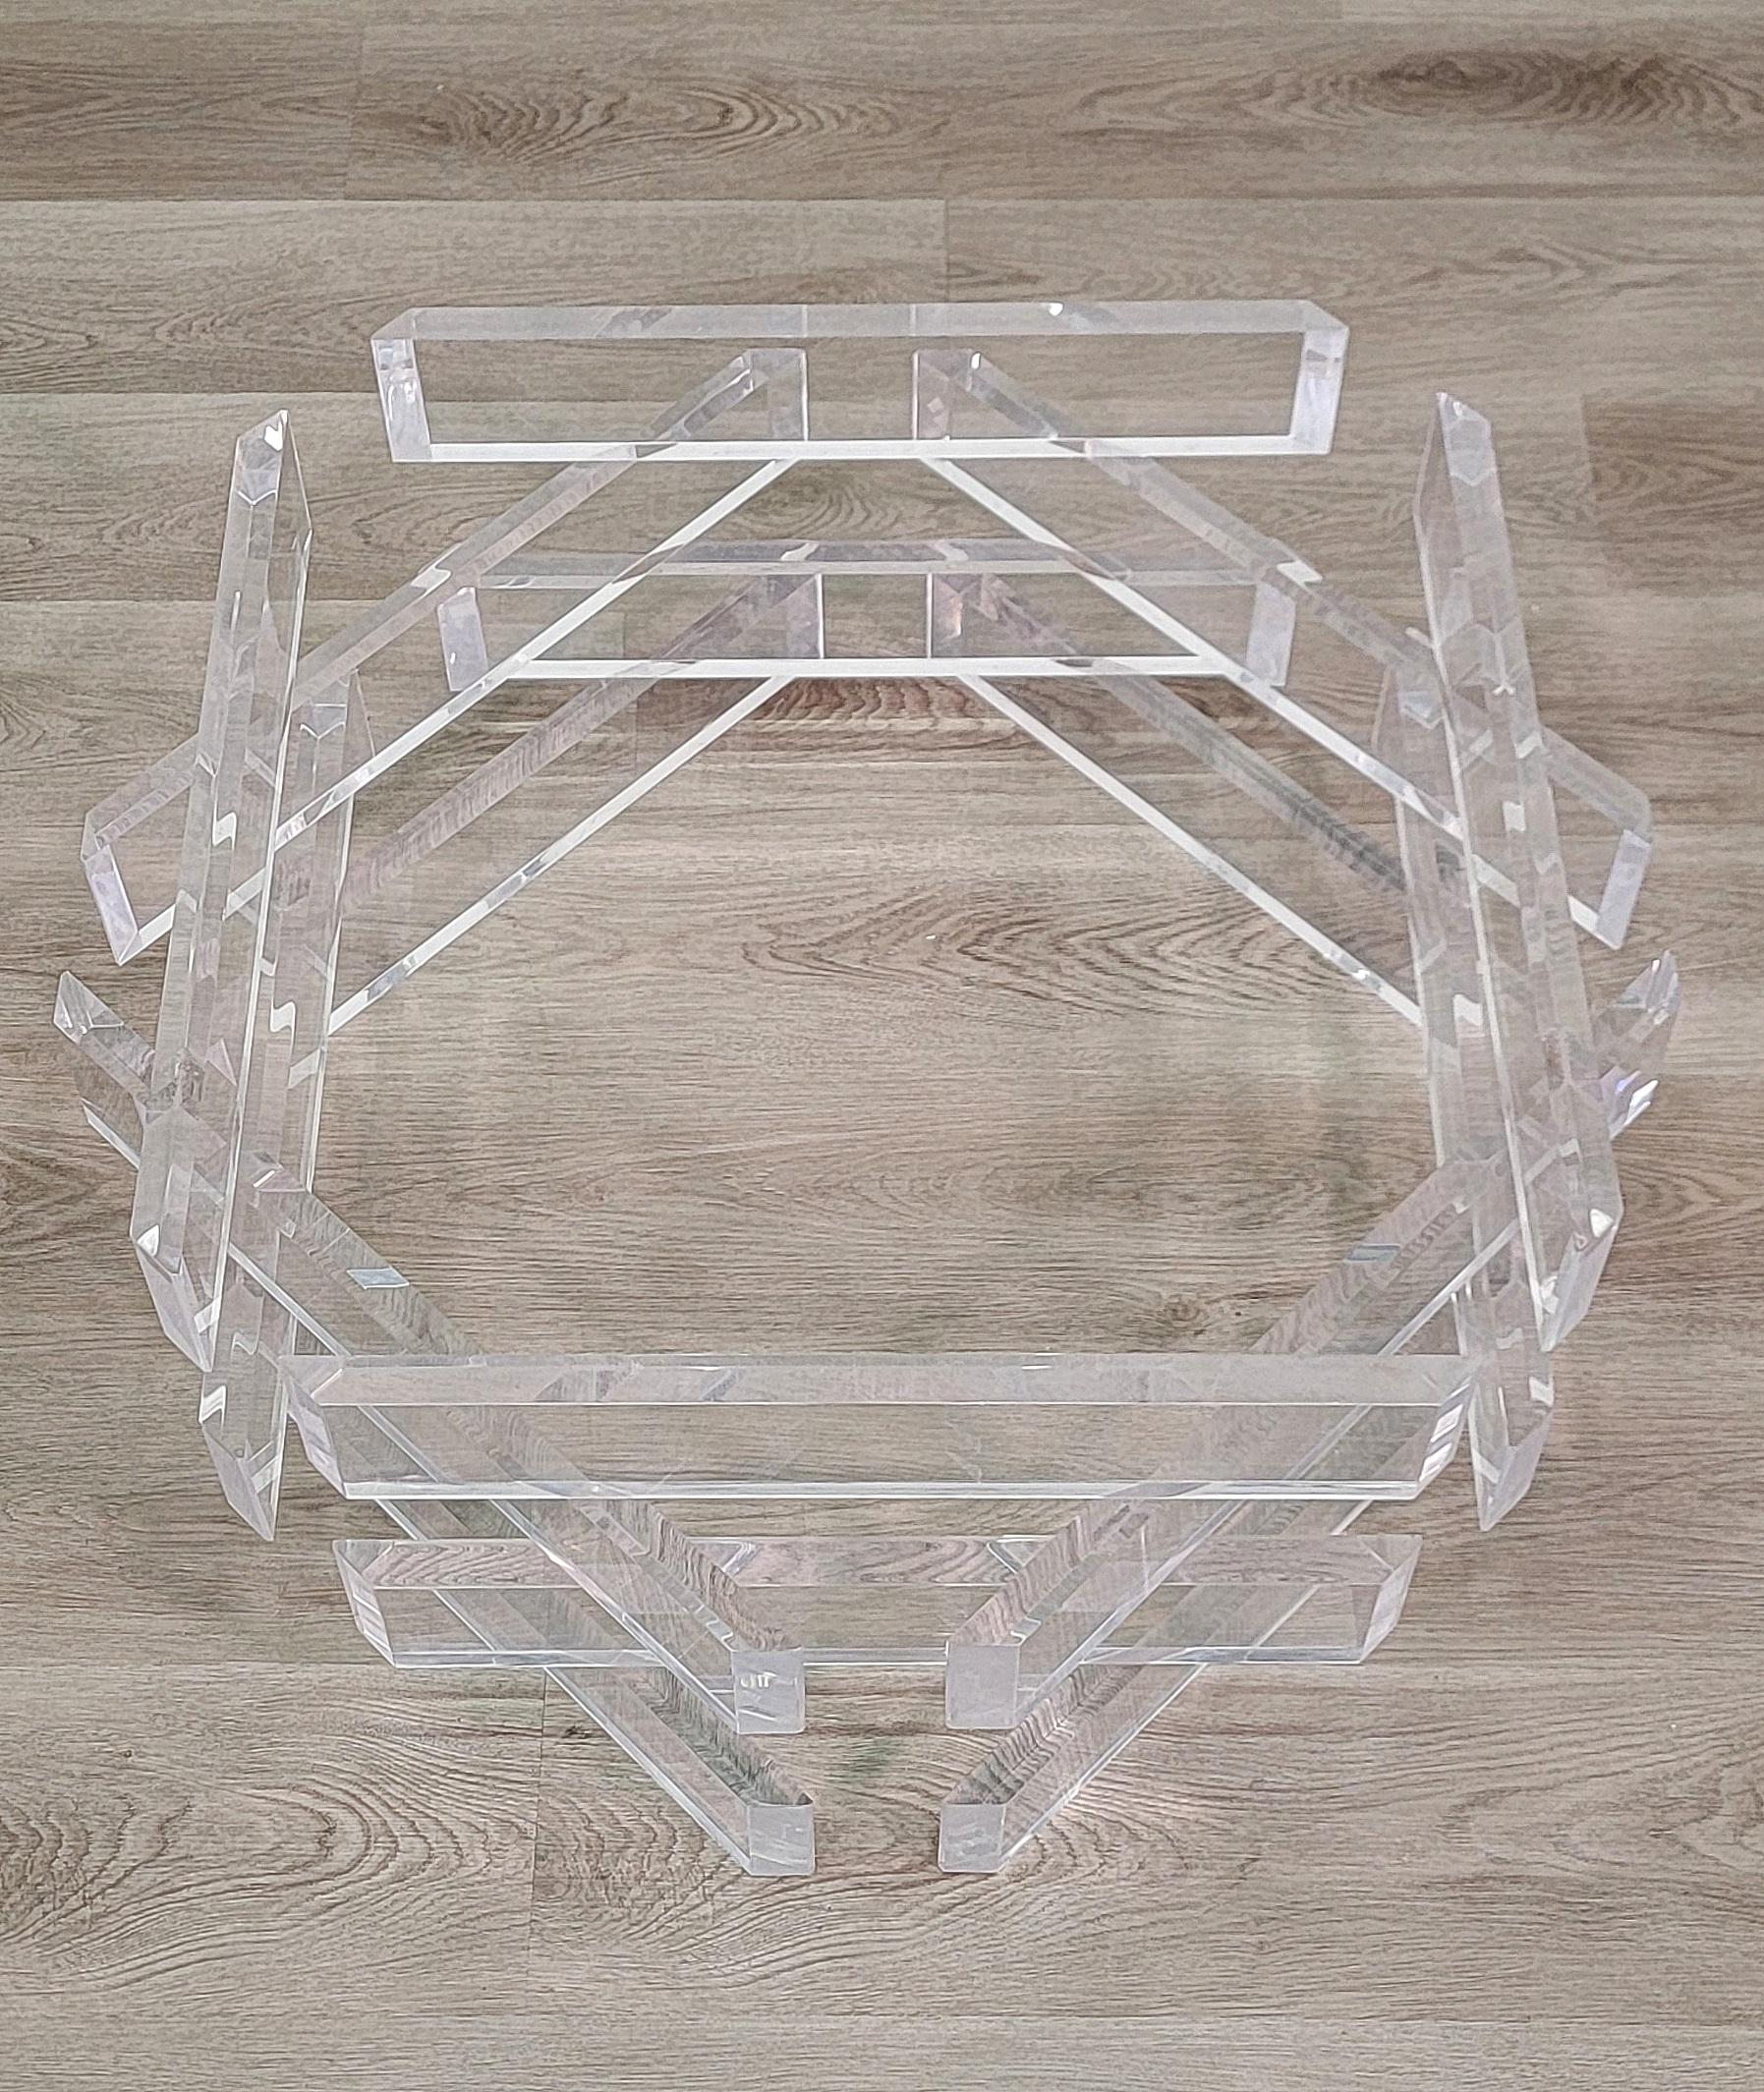 Amazing vintage lucite cocktail table base comprised of thick lucite stacked brick style in an octagon pattern. A Hollywood Regency classic that works well with modern and contemporary decors. We can provide a round, octagonal or square glass top